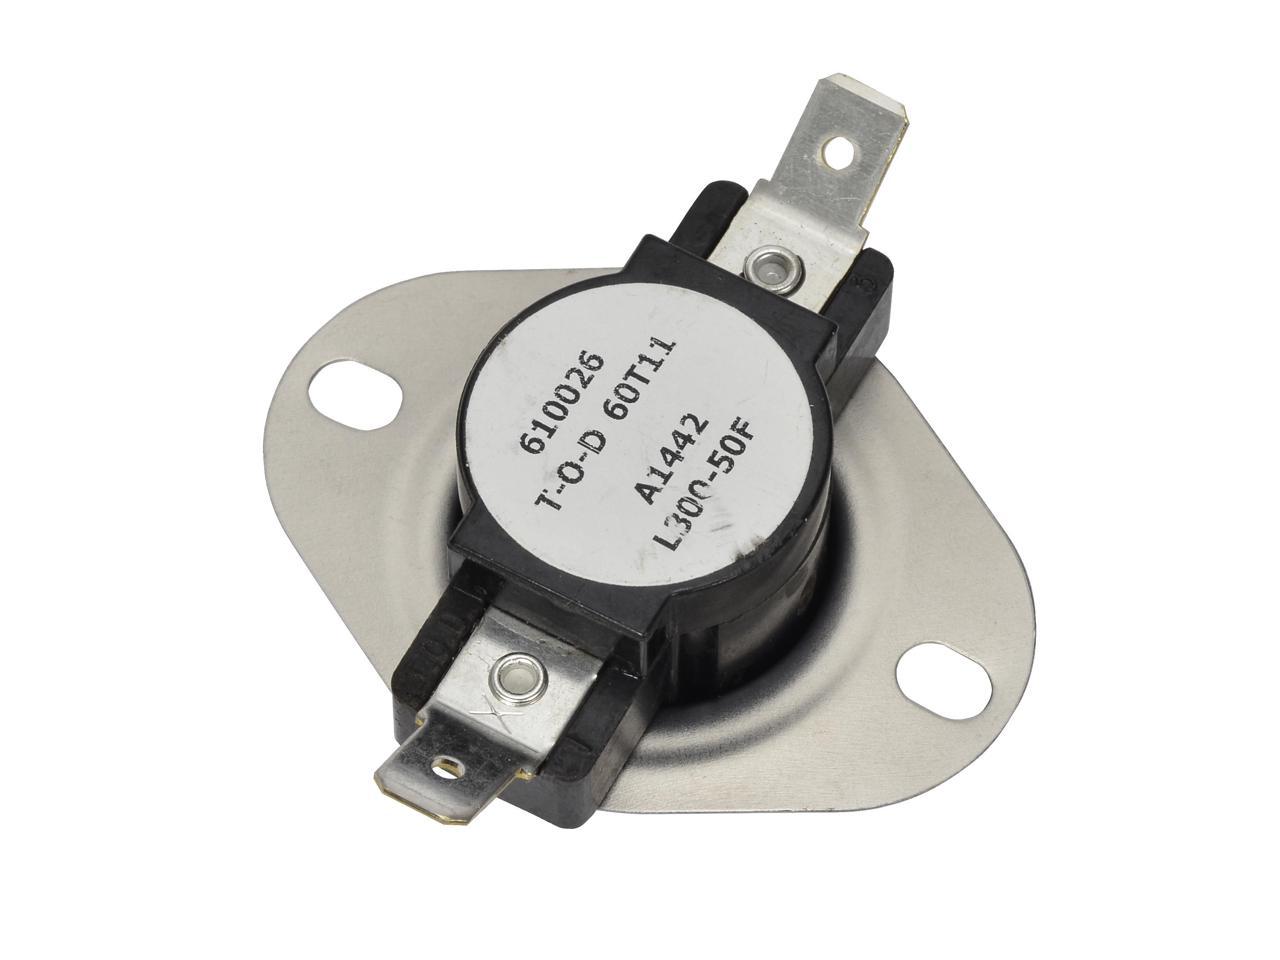 Emerson 3L03 140 Snap Disc Limit Control with Manual Reset